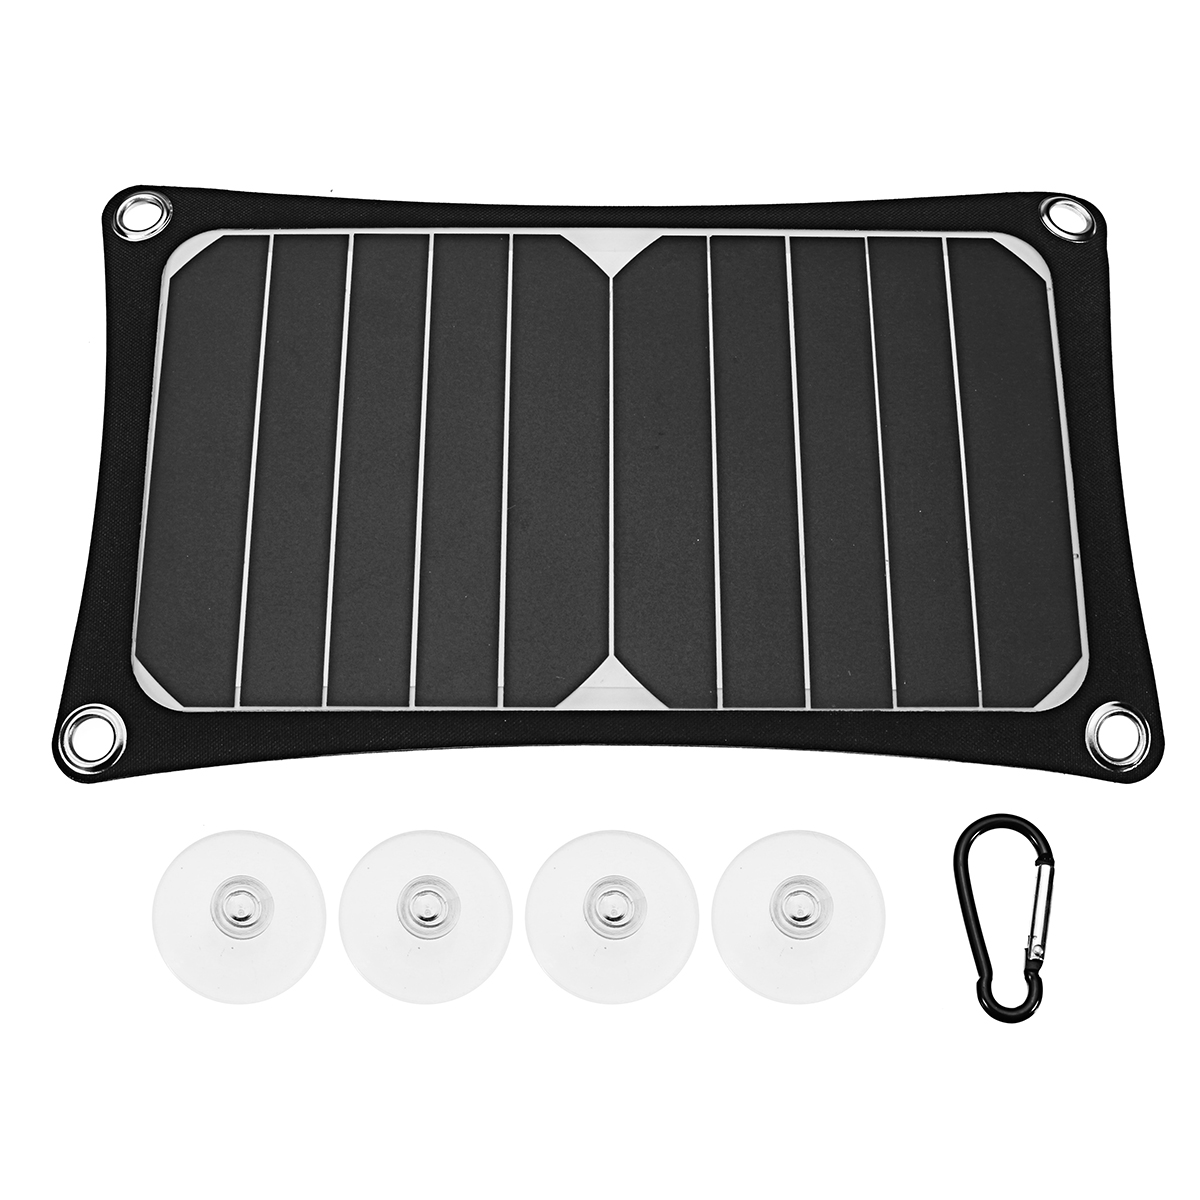 

Portable 5V 7.5W 3000mah USB Waterproof Solar Panel For Outdoor Charging